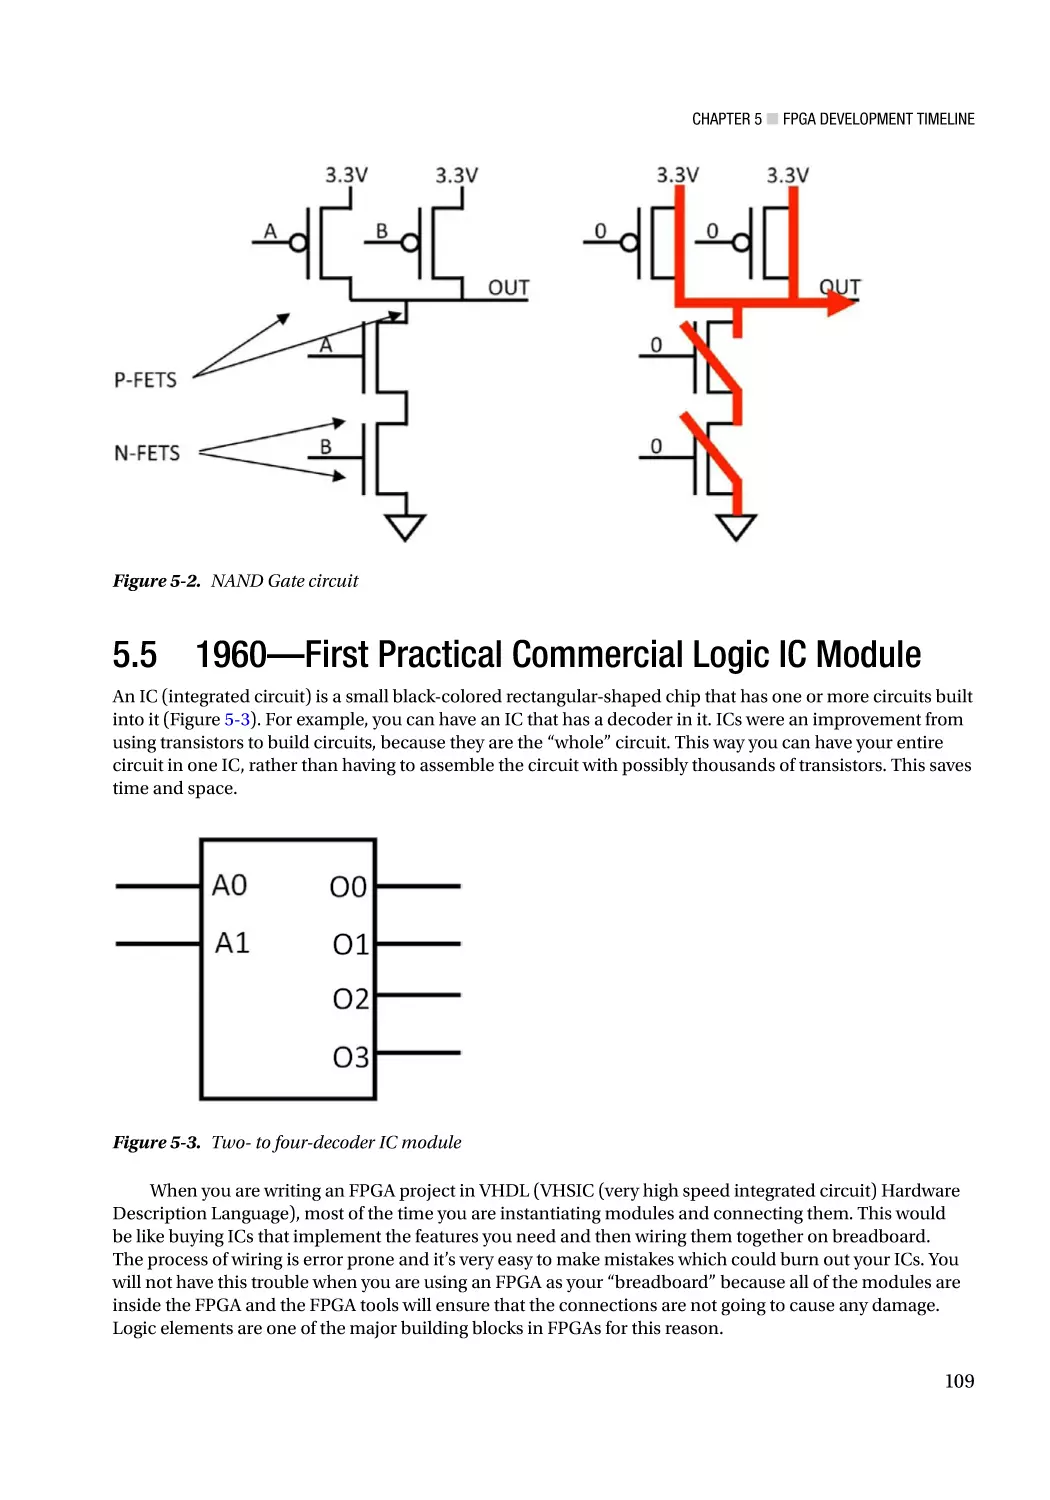 5.5 1960—First Practical Commercial Logic IC Module